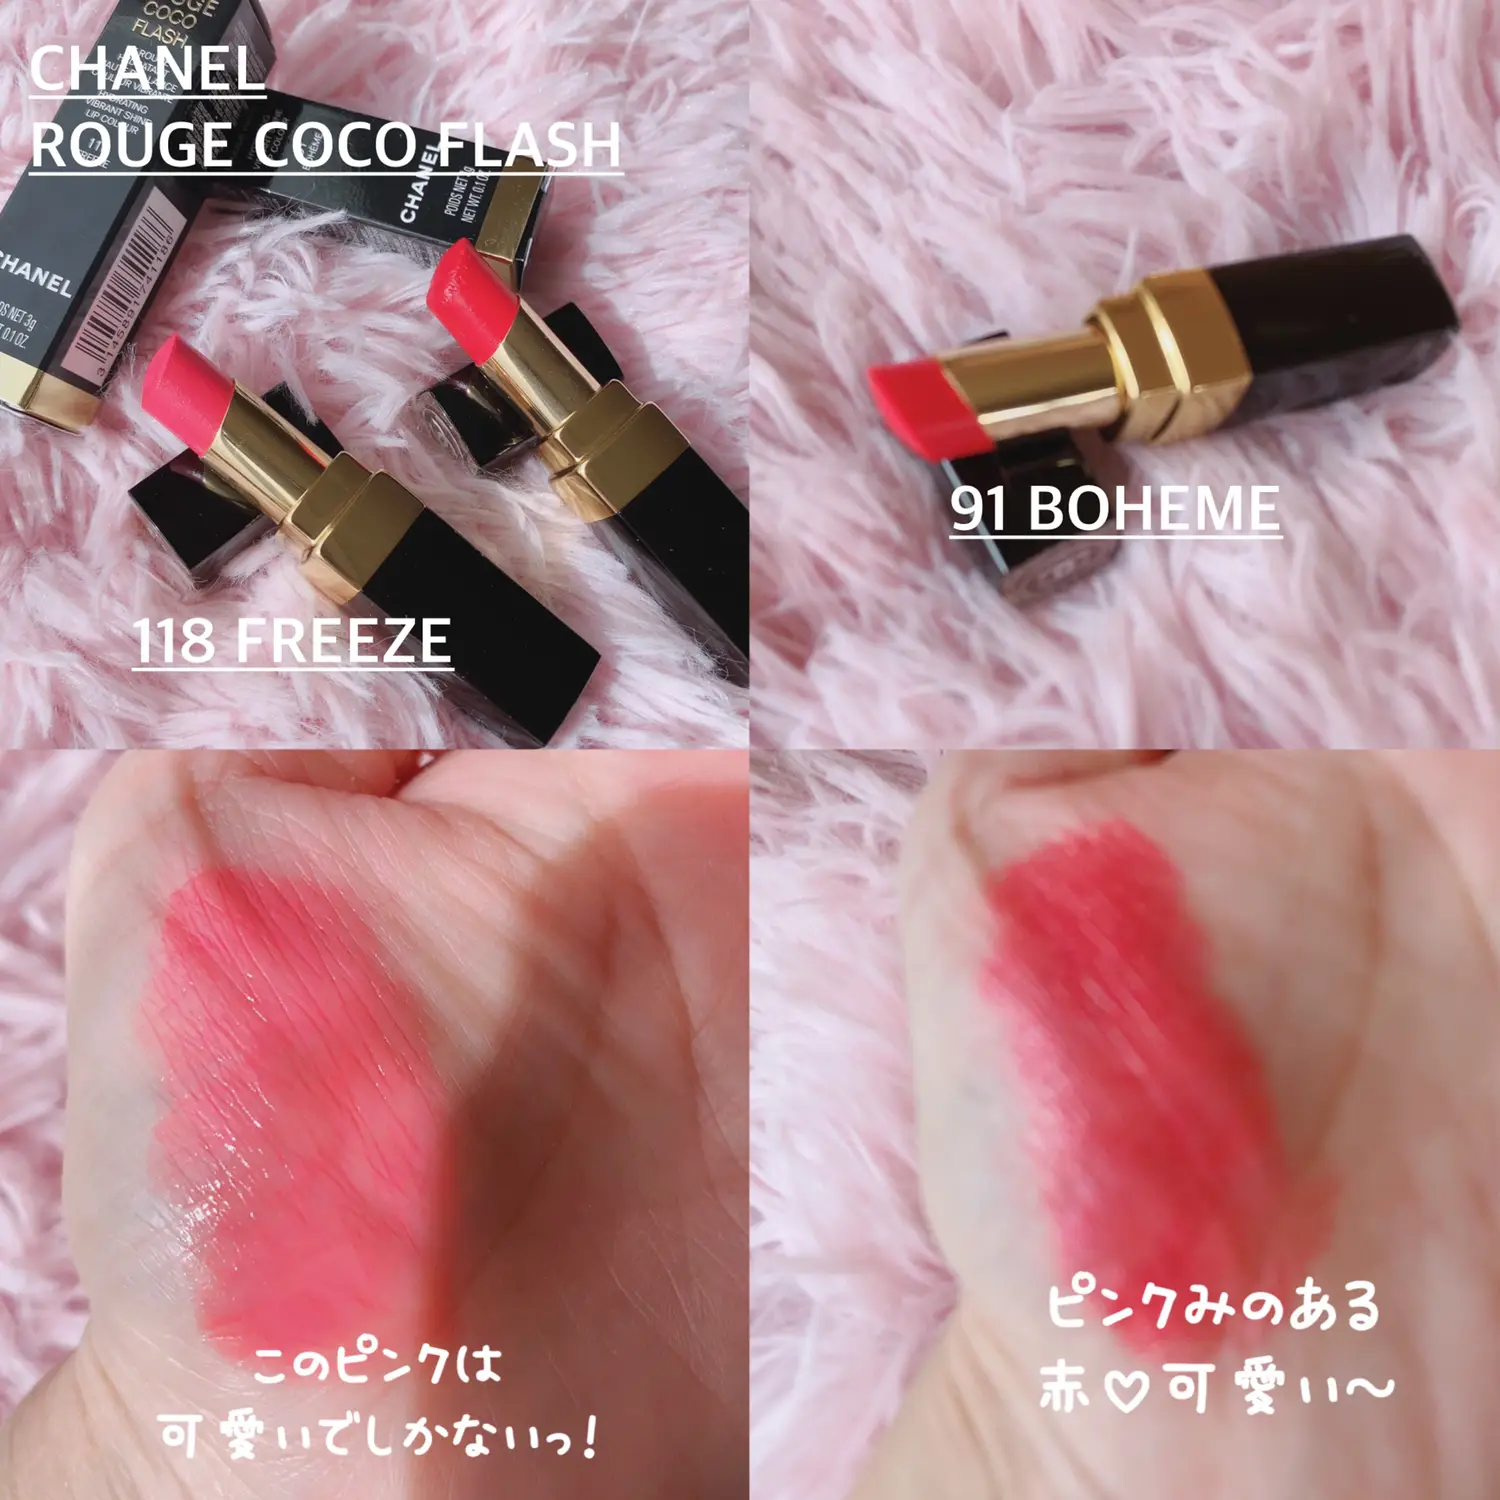 CHANEL 『 ROUGE COCO FLASH ♡ 』